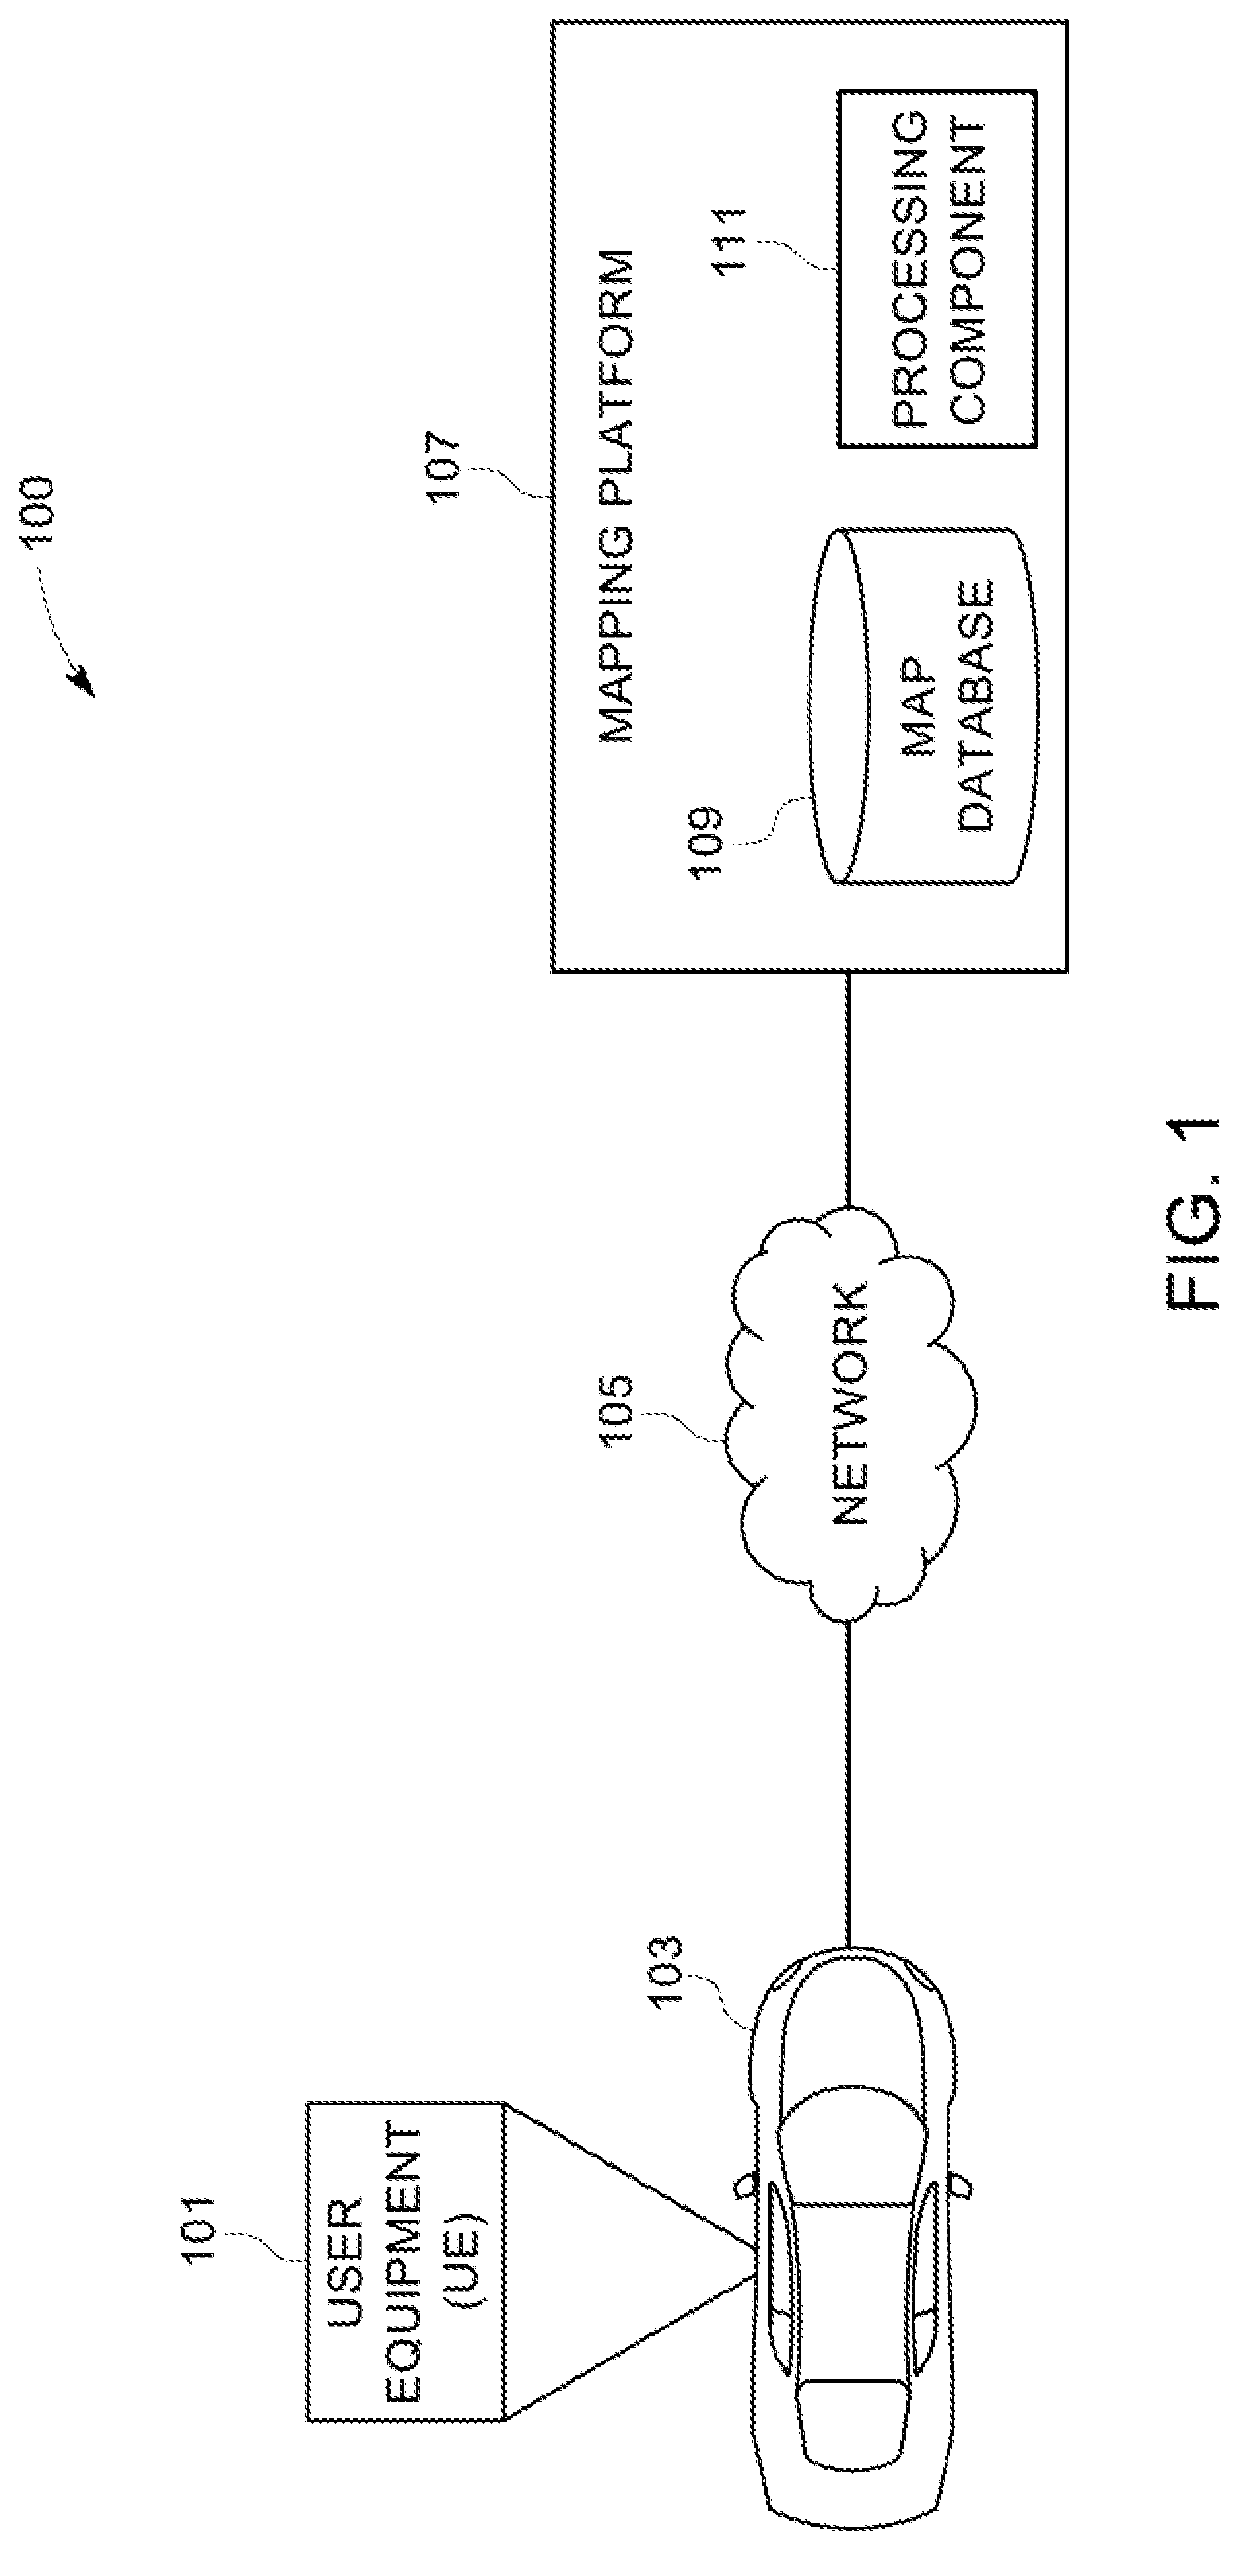 Method and system for supervised learning of road signs